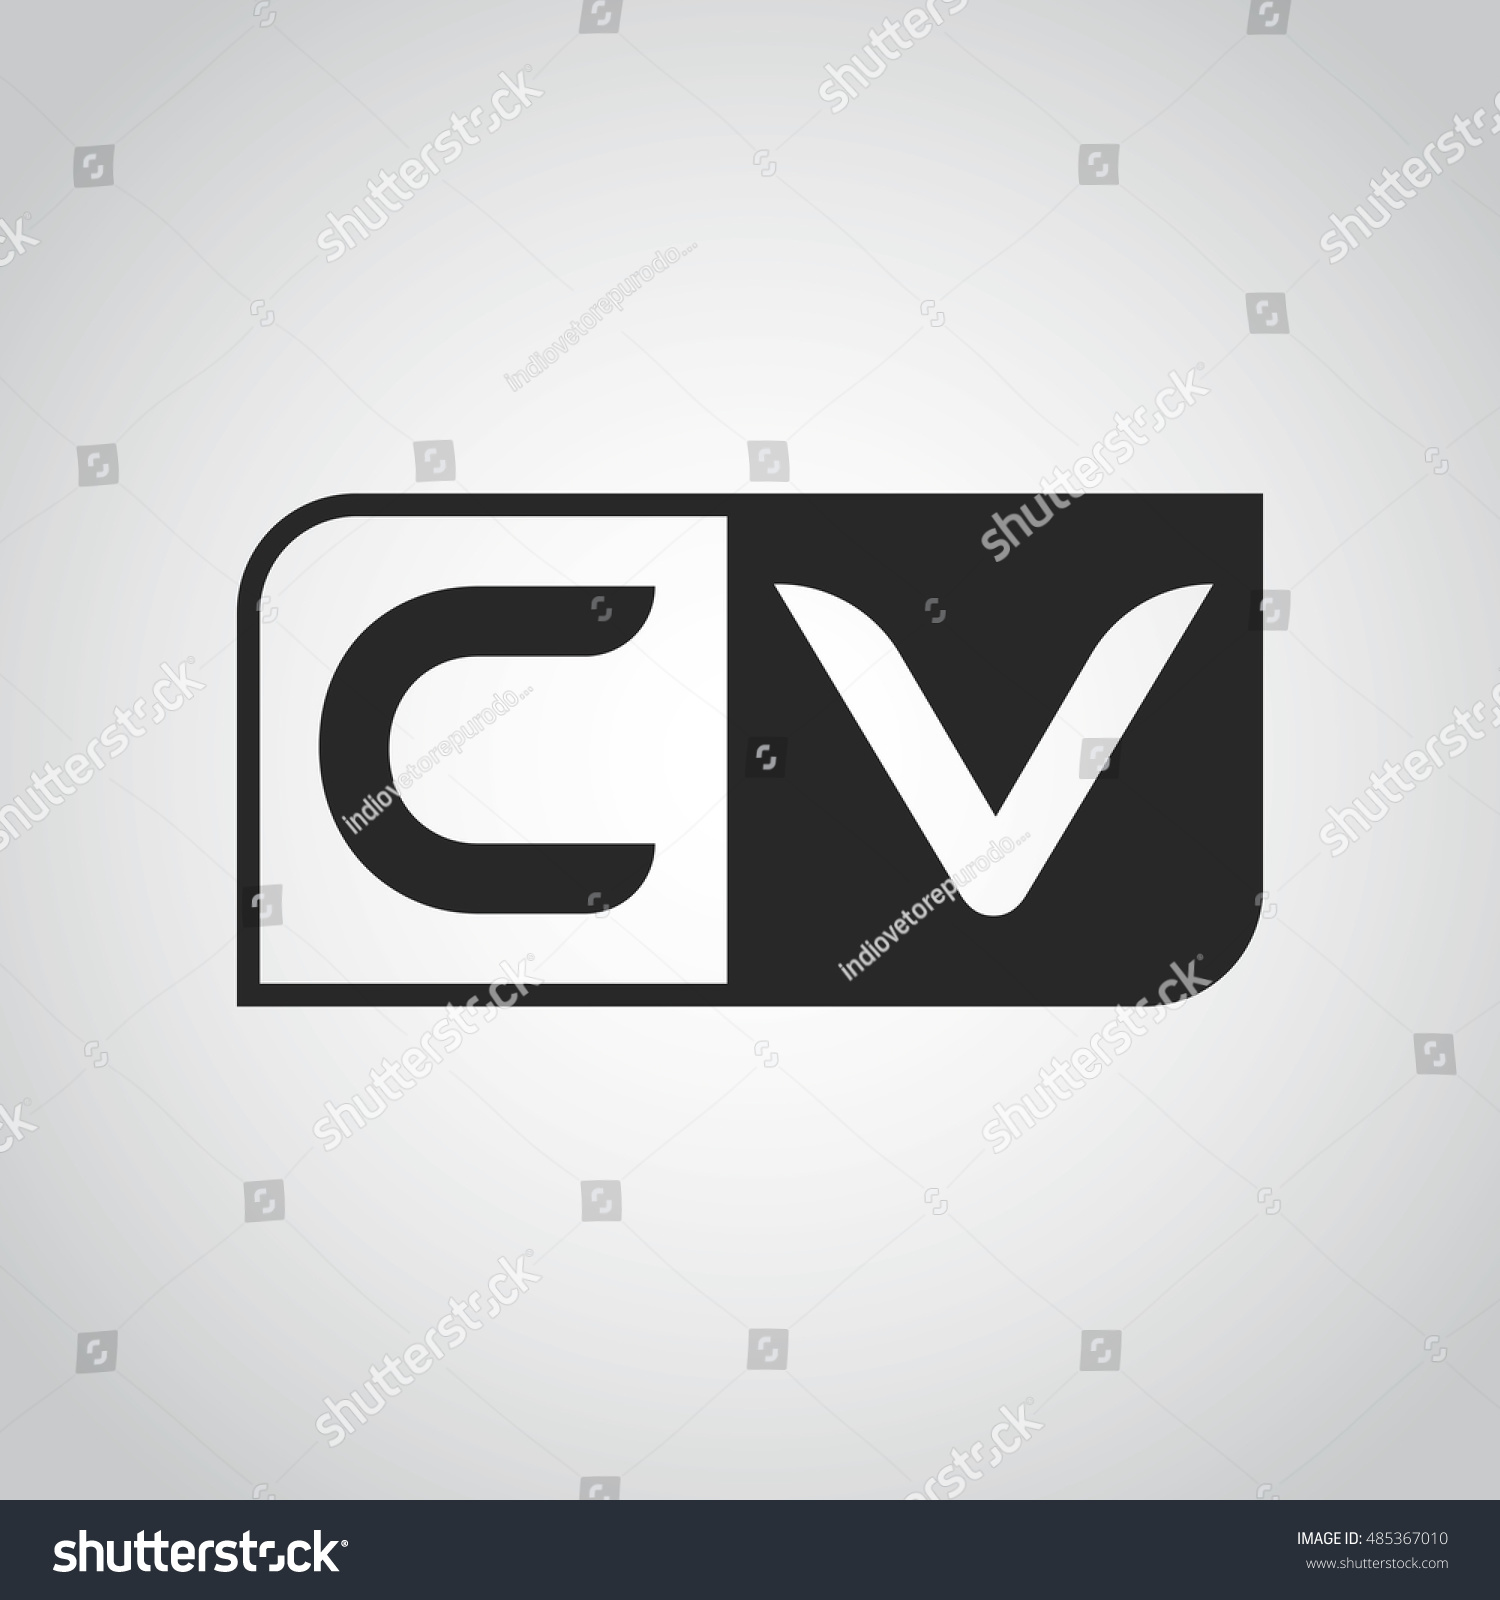 logo letter cv two different sides stock vector 485367010